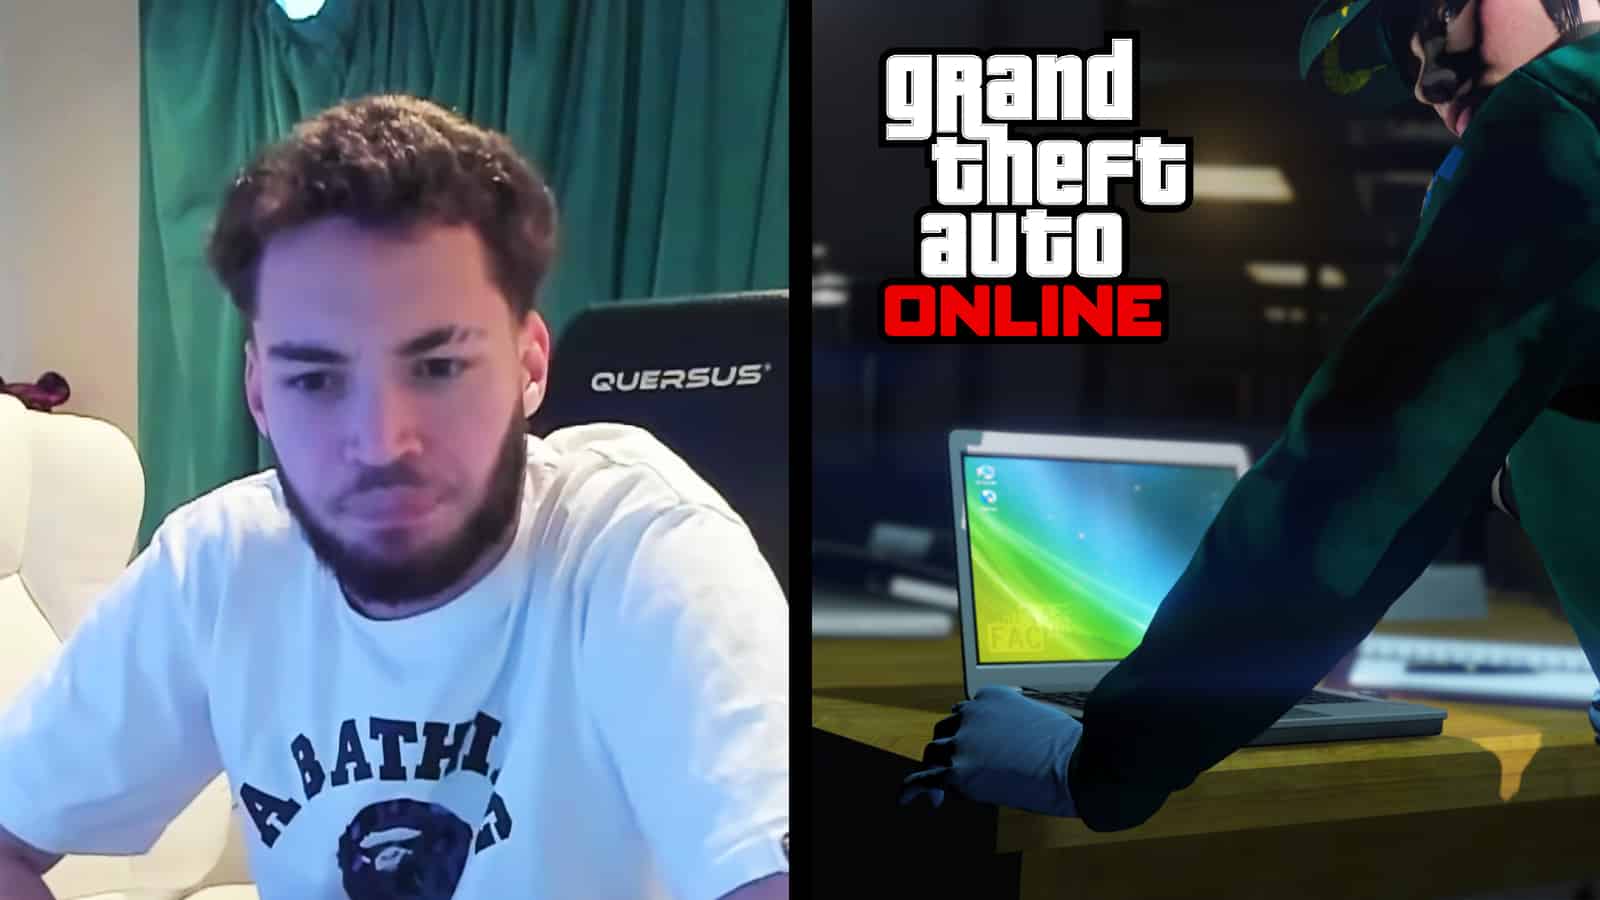 Half/half image of Adin Ross addressing YouTube viewers and a hacker on GTA V.